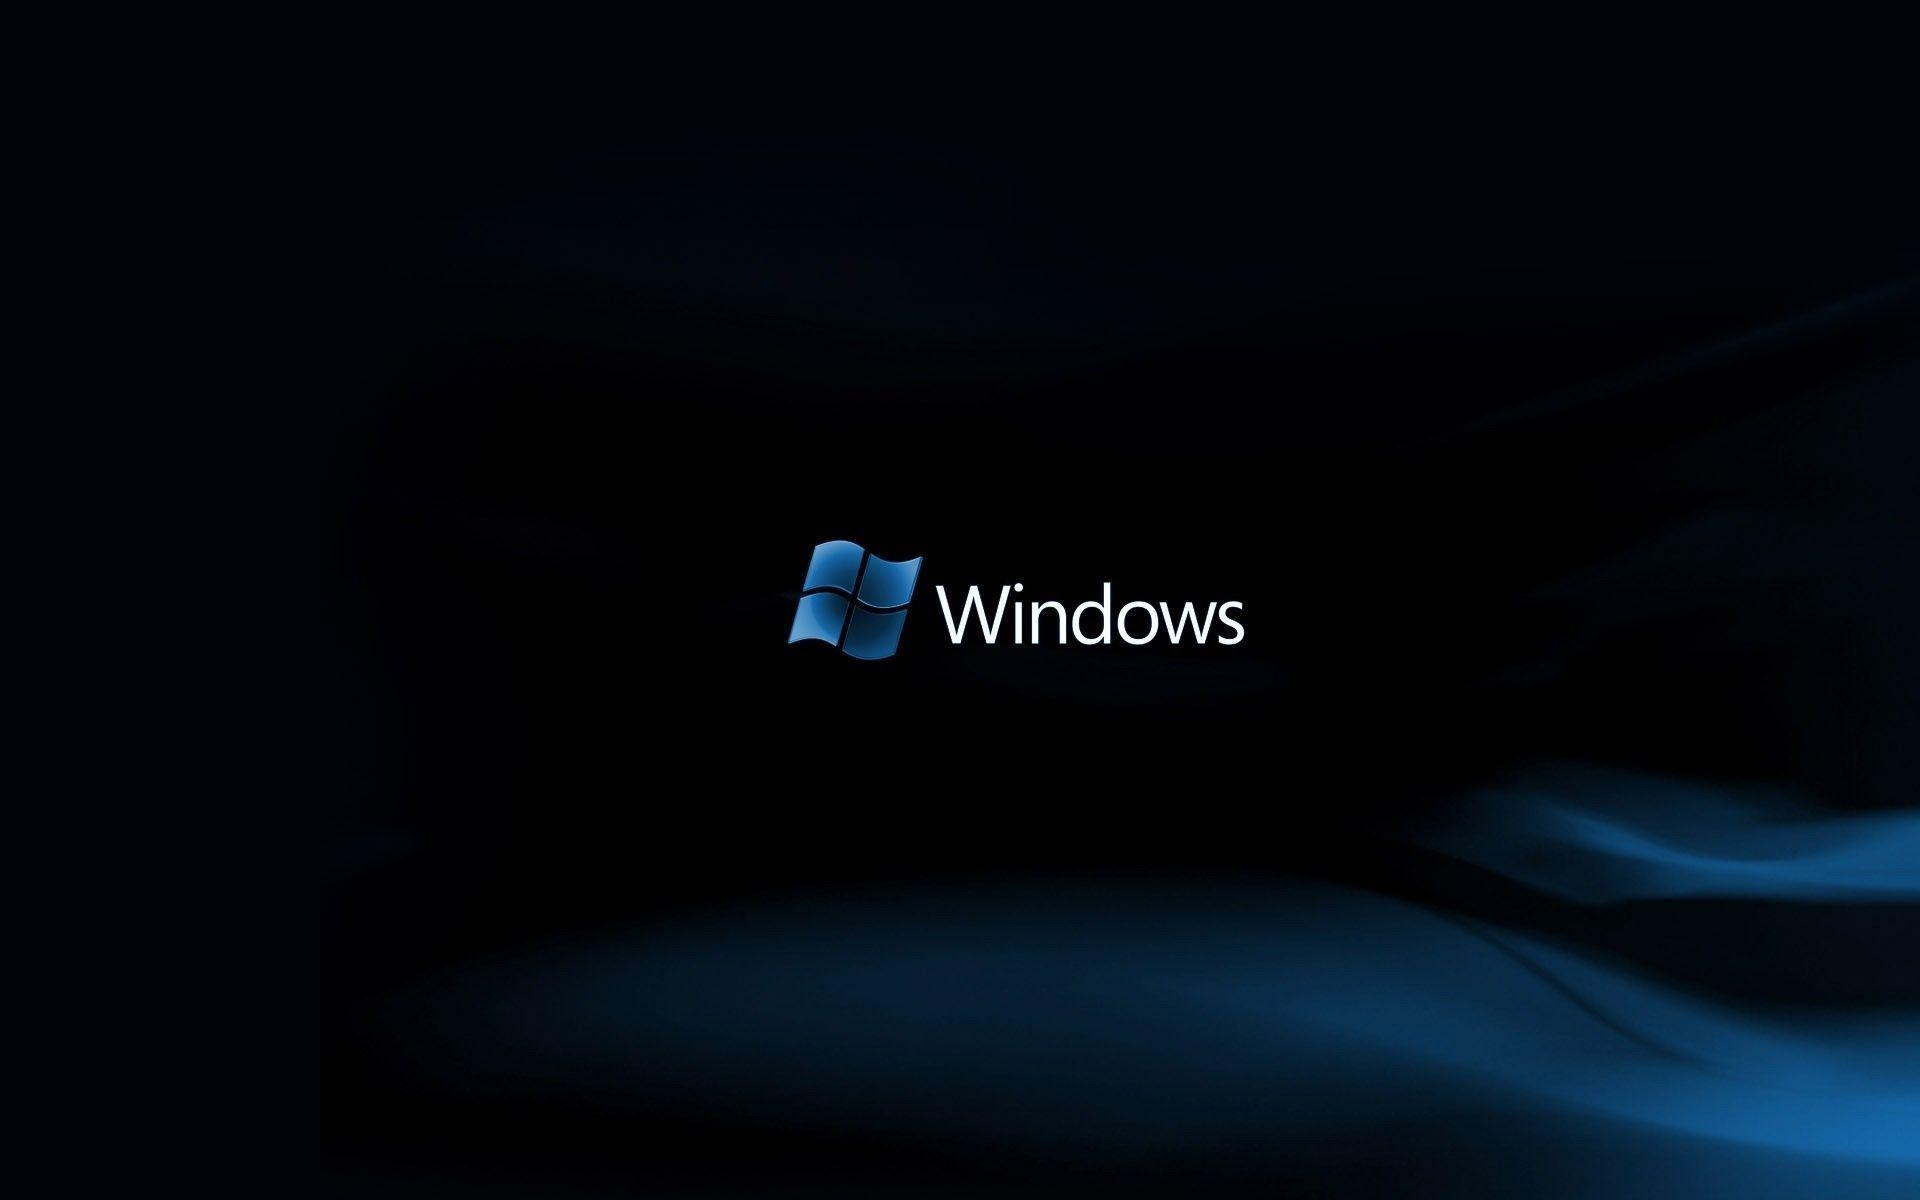 New Windows Background Wallpaper and Photo Download by PHOTOSof.ORG